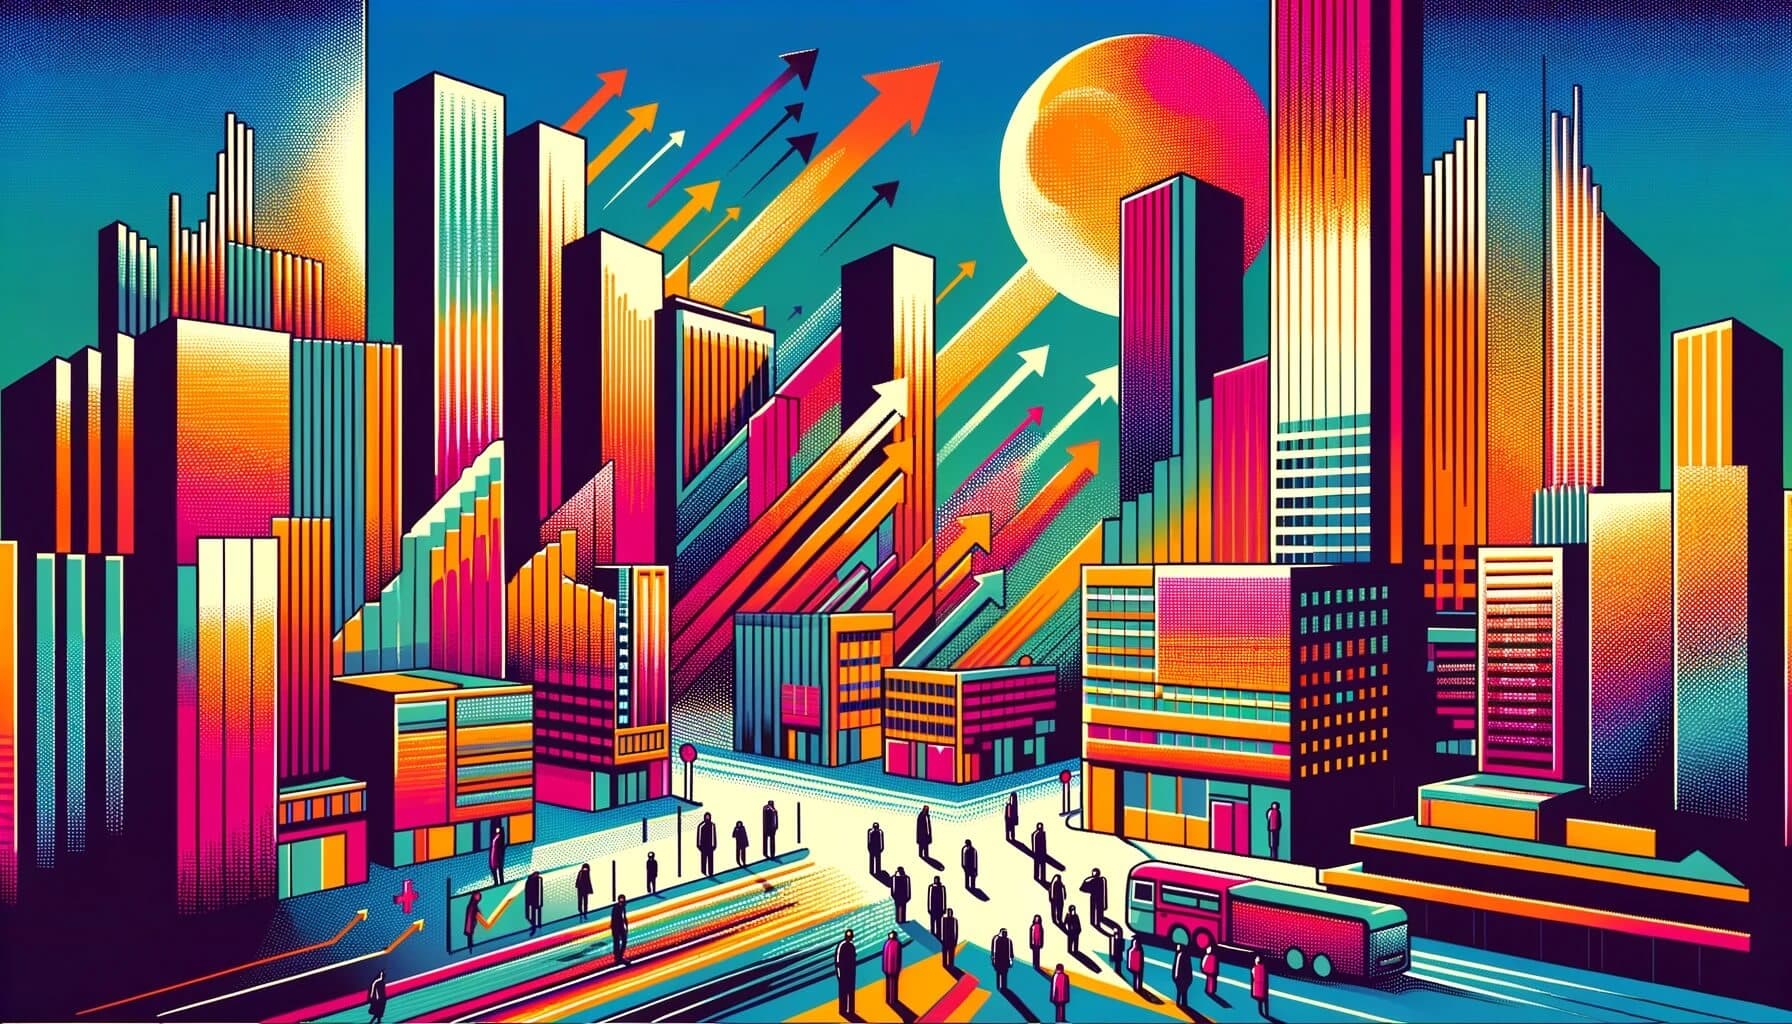 An artistic rendering of a vibrant city skyline, with colorful skyscrapers and geometric patterns representing economic growth and technological advancement, used to visually introduce the concept of digital currencies gaining global adoption, as mentioned in the section discussing digital currencies as the future of financial systems.